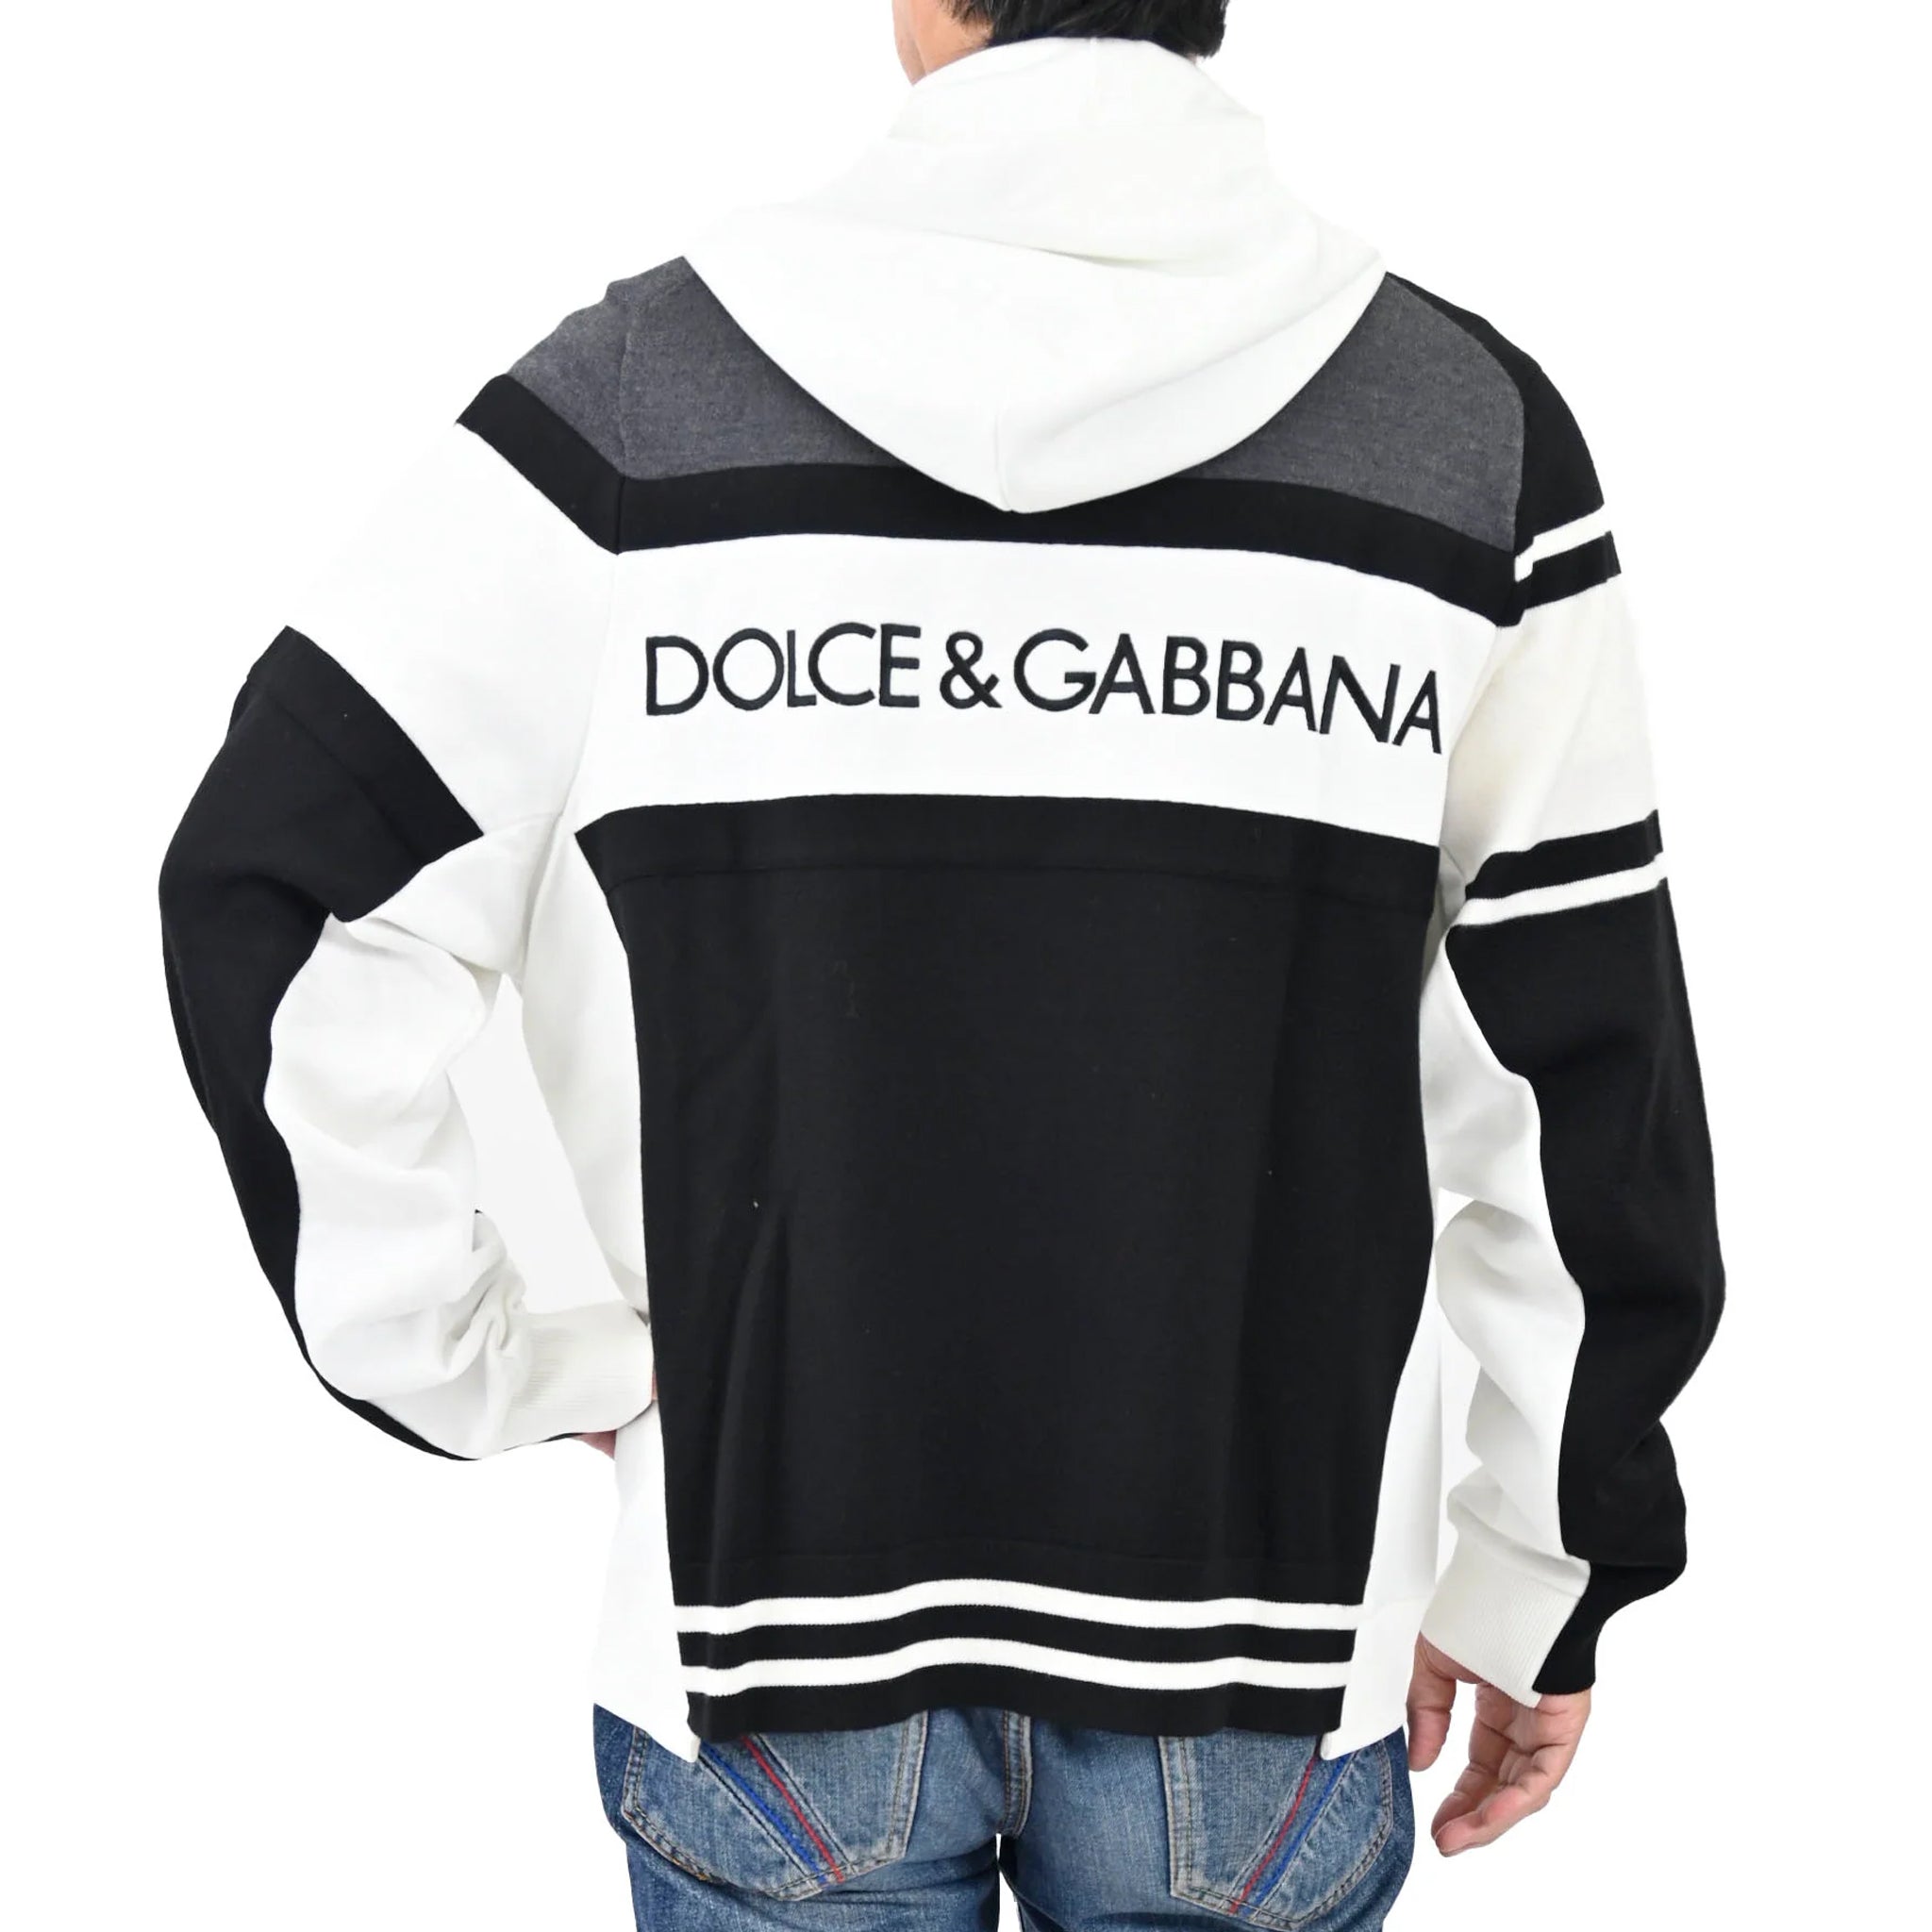 DOLCE-GABBANA-OUTLET-SALE-Dolce-Gabbana-Cotton-Hooded-Sweatshirt-Shirts-ARCHIVE-COLLECTION-3.jpg